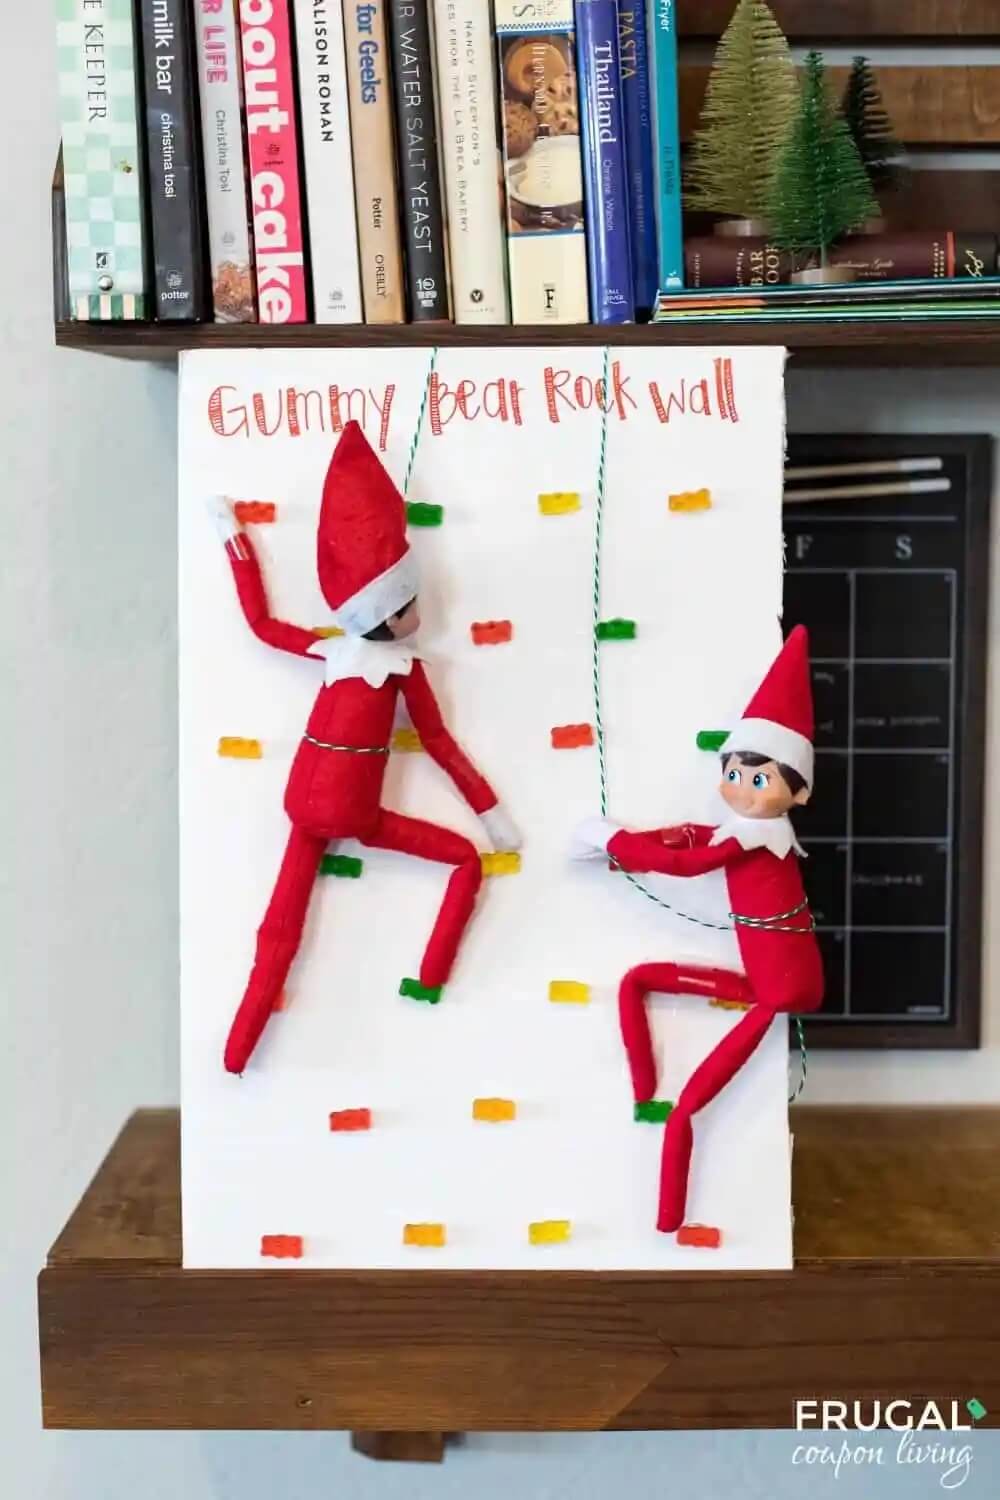 two Elf on the Shelf dolls "rock climbing" on a piece of cardboard with gummy bear footholds.